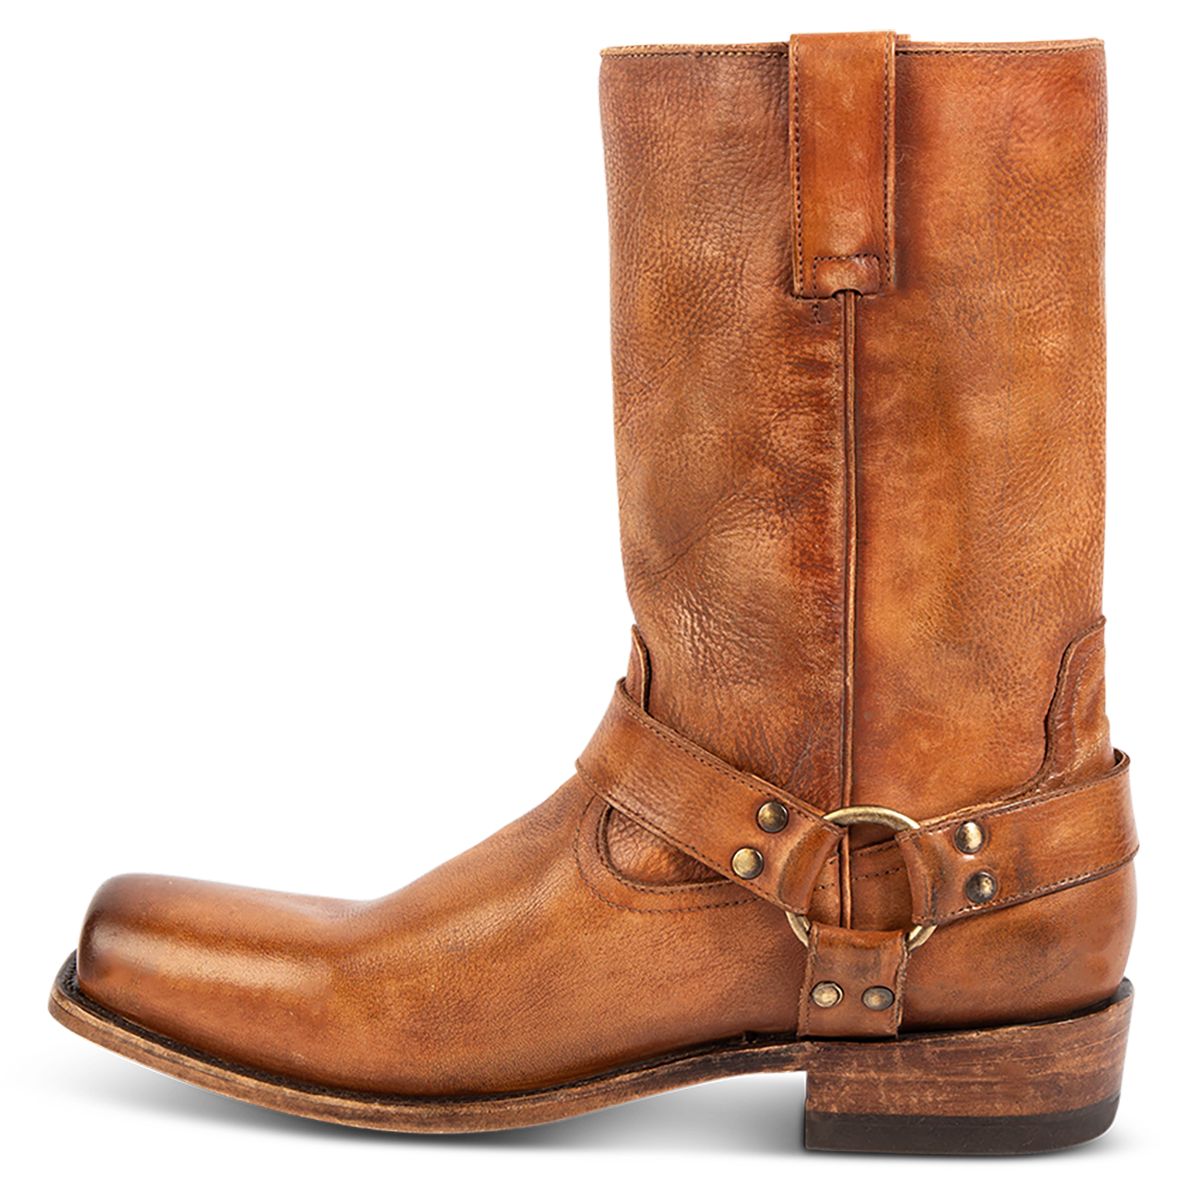 Inside view showing leather ankle harness with brass hardware on FREEBIRD men's Copperhead whiskey boot